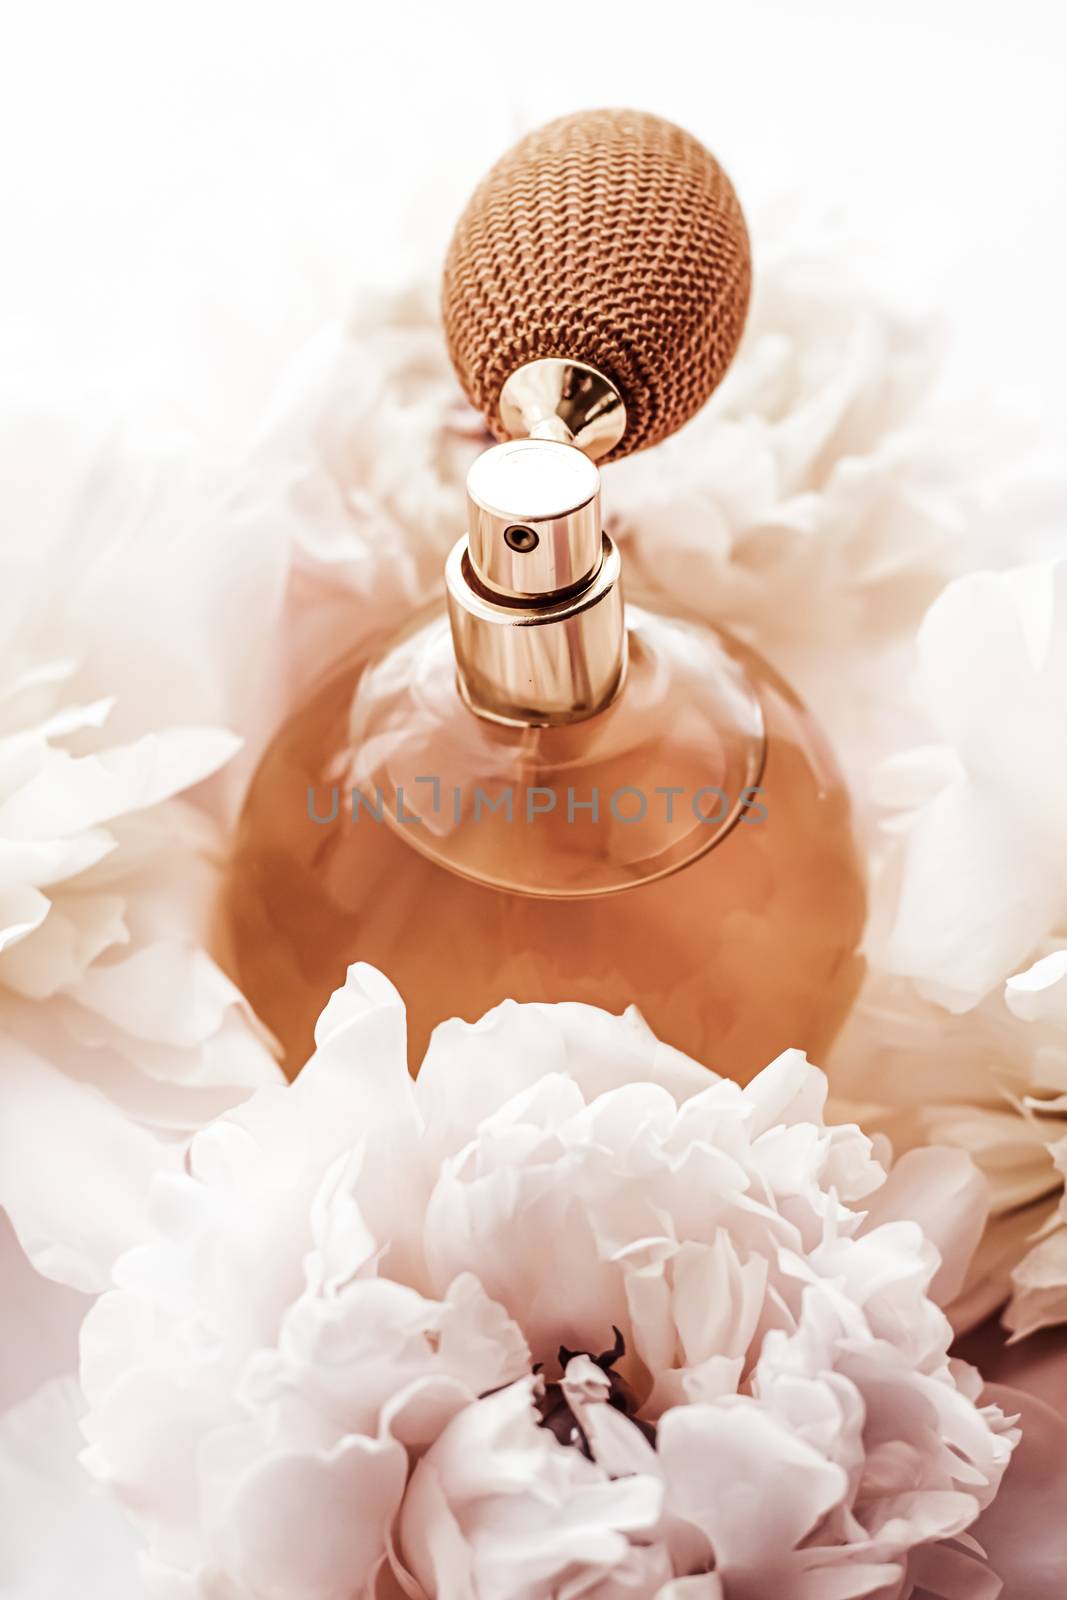 Fragrance bottle as vintage perfume product on background of peony flowers, parfum ad and beauty branding design